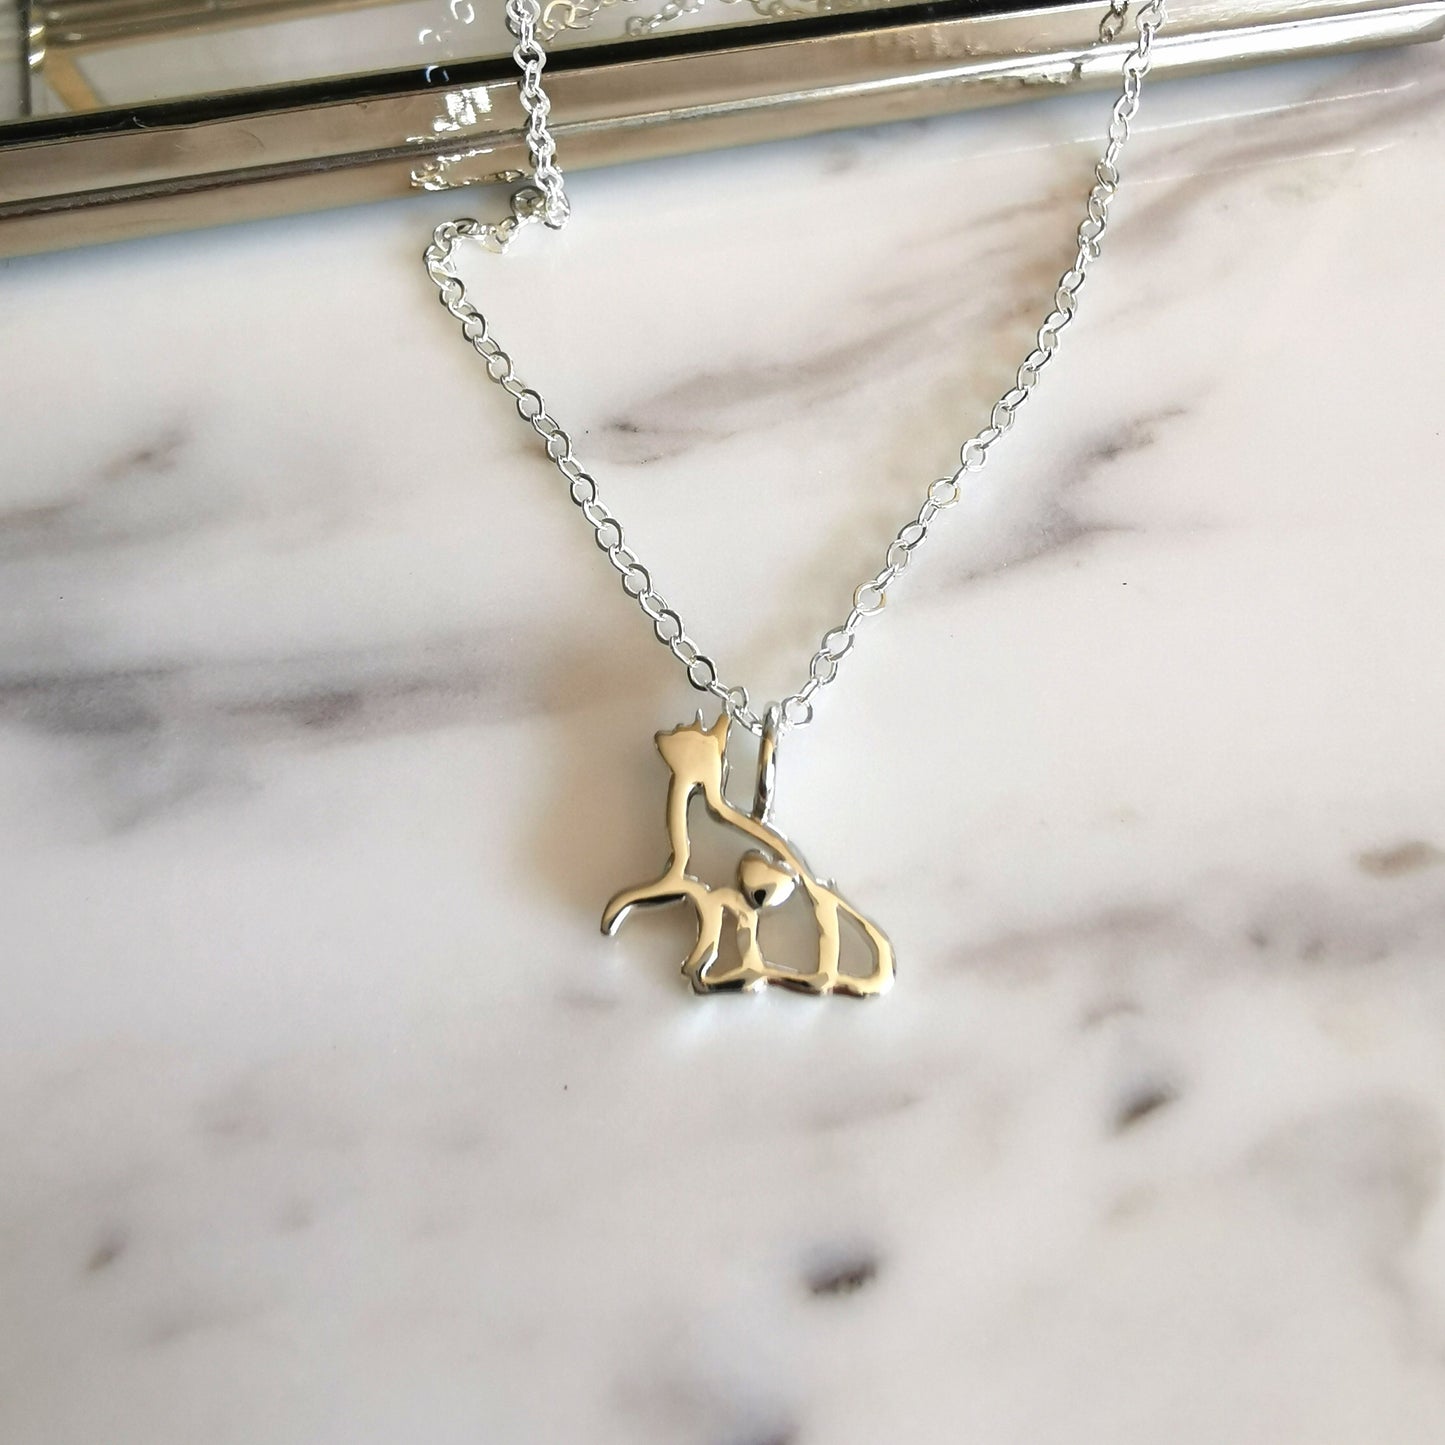 Curious Kitty Cat Necklace